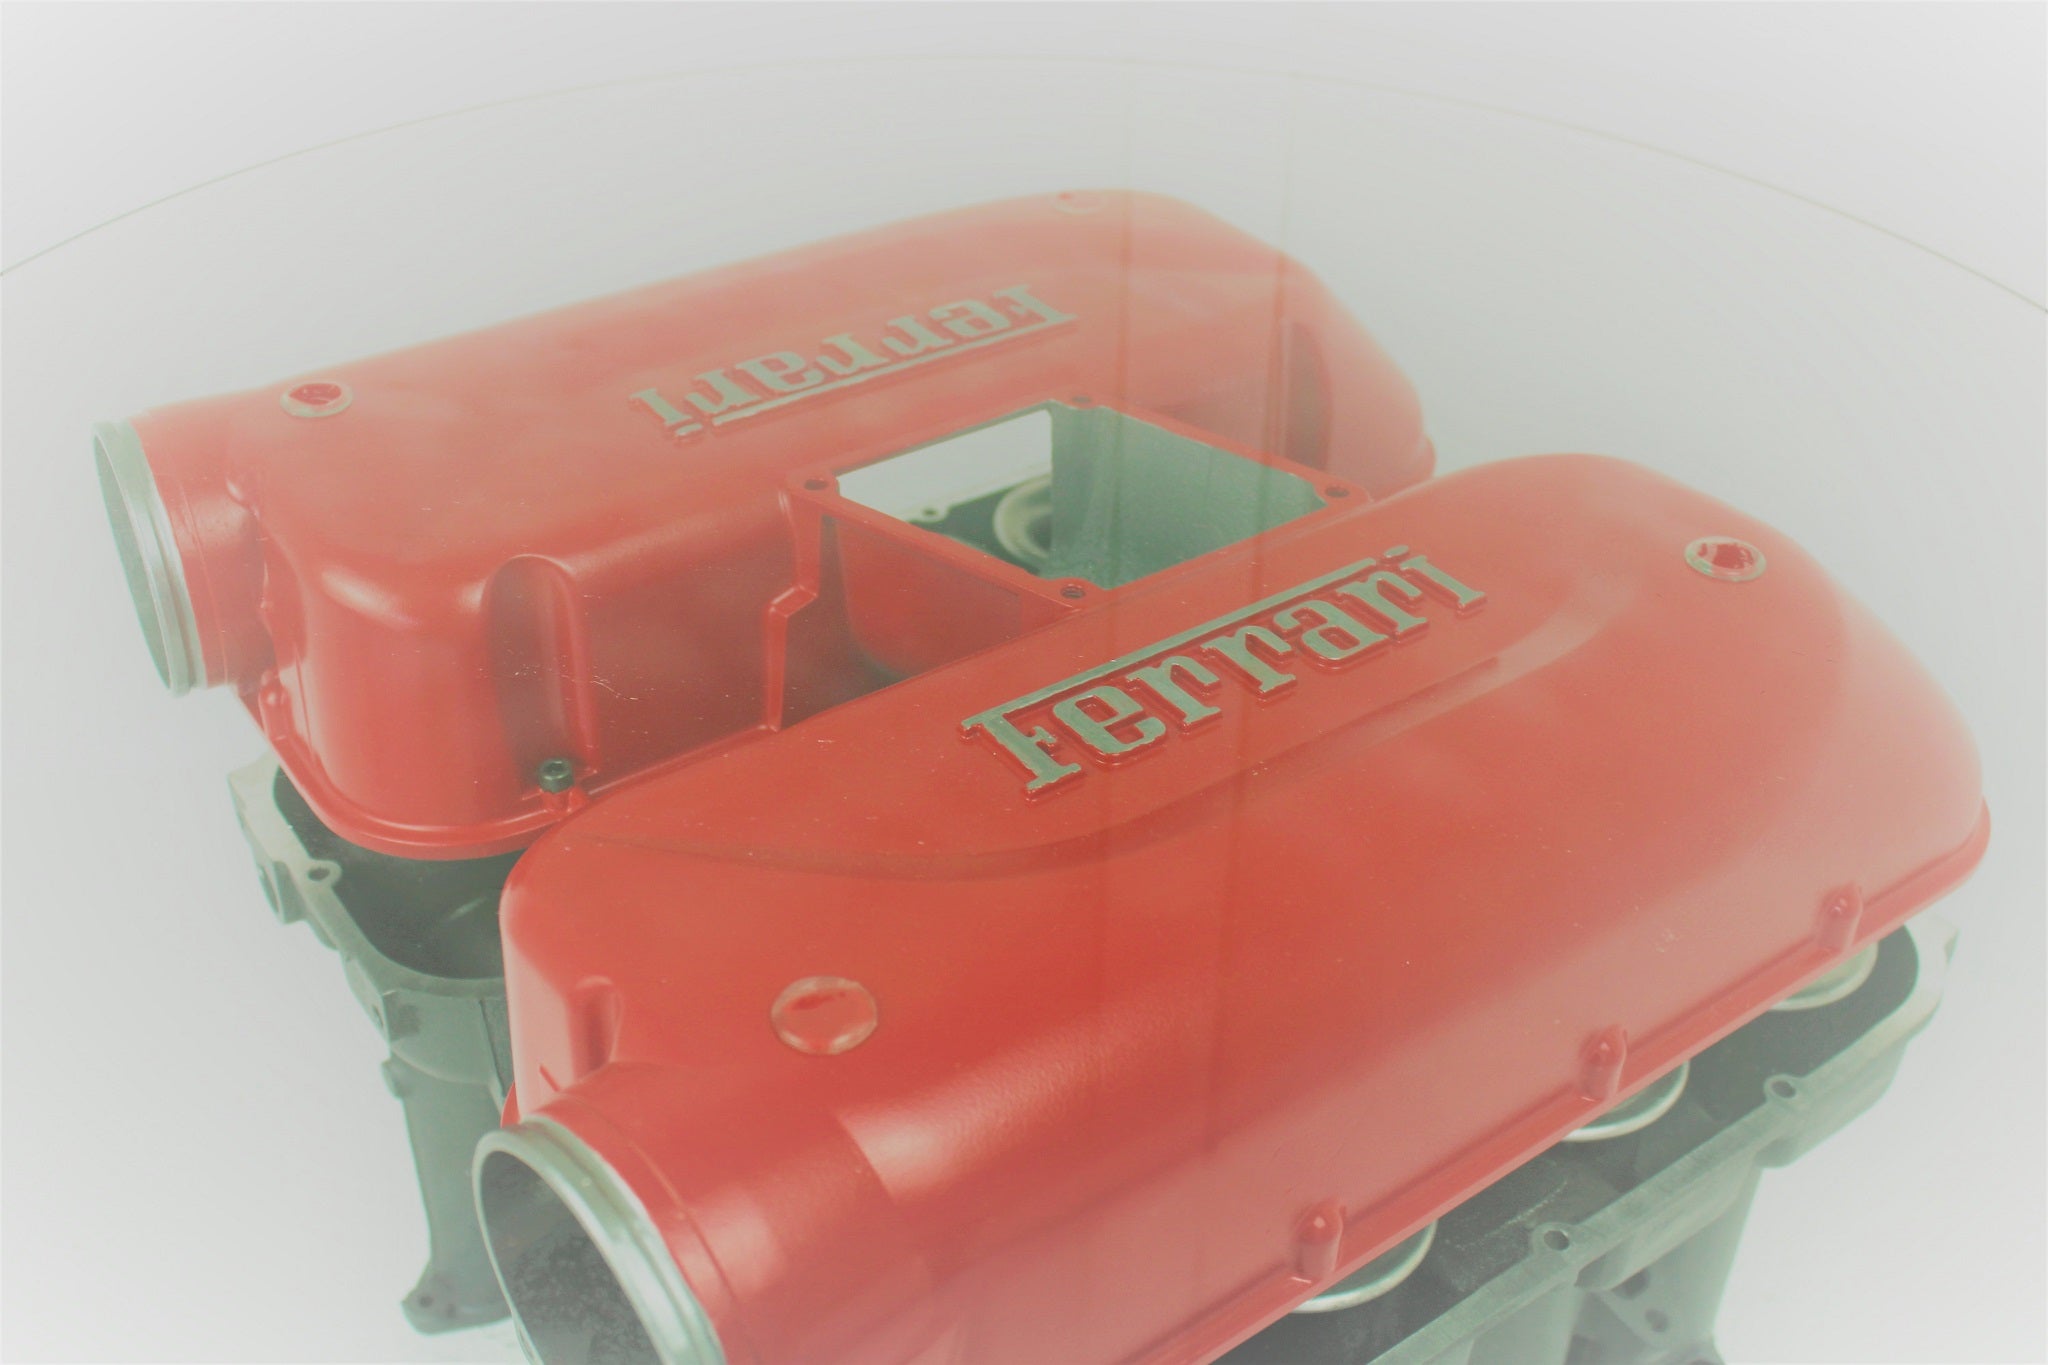 Birds-eye view of a Ferrari intake manifold table, finished in red and gunmetal gray with a round glass top. The Ferrari logo is displayed on both sides.